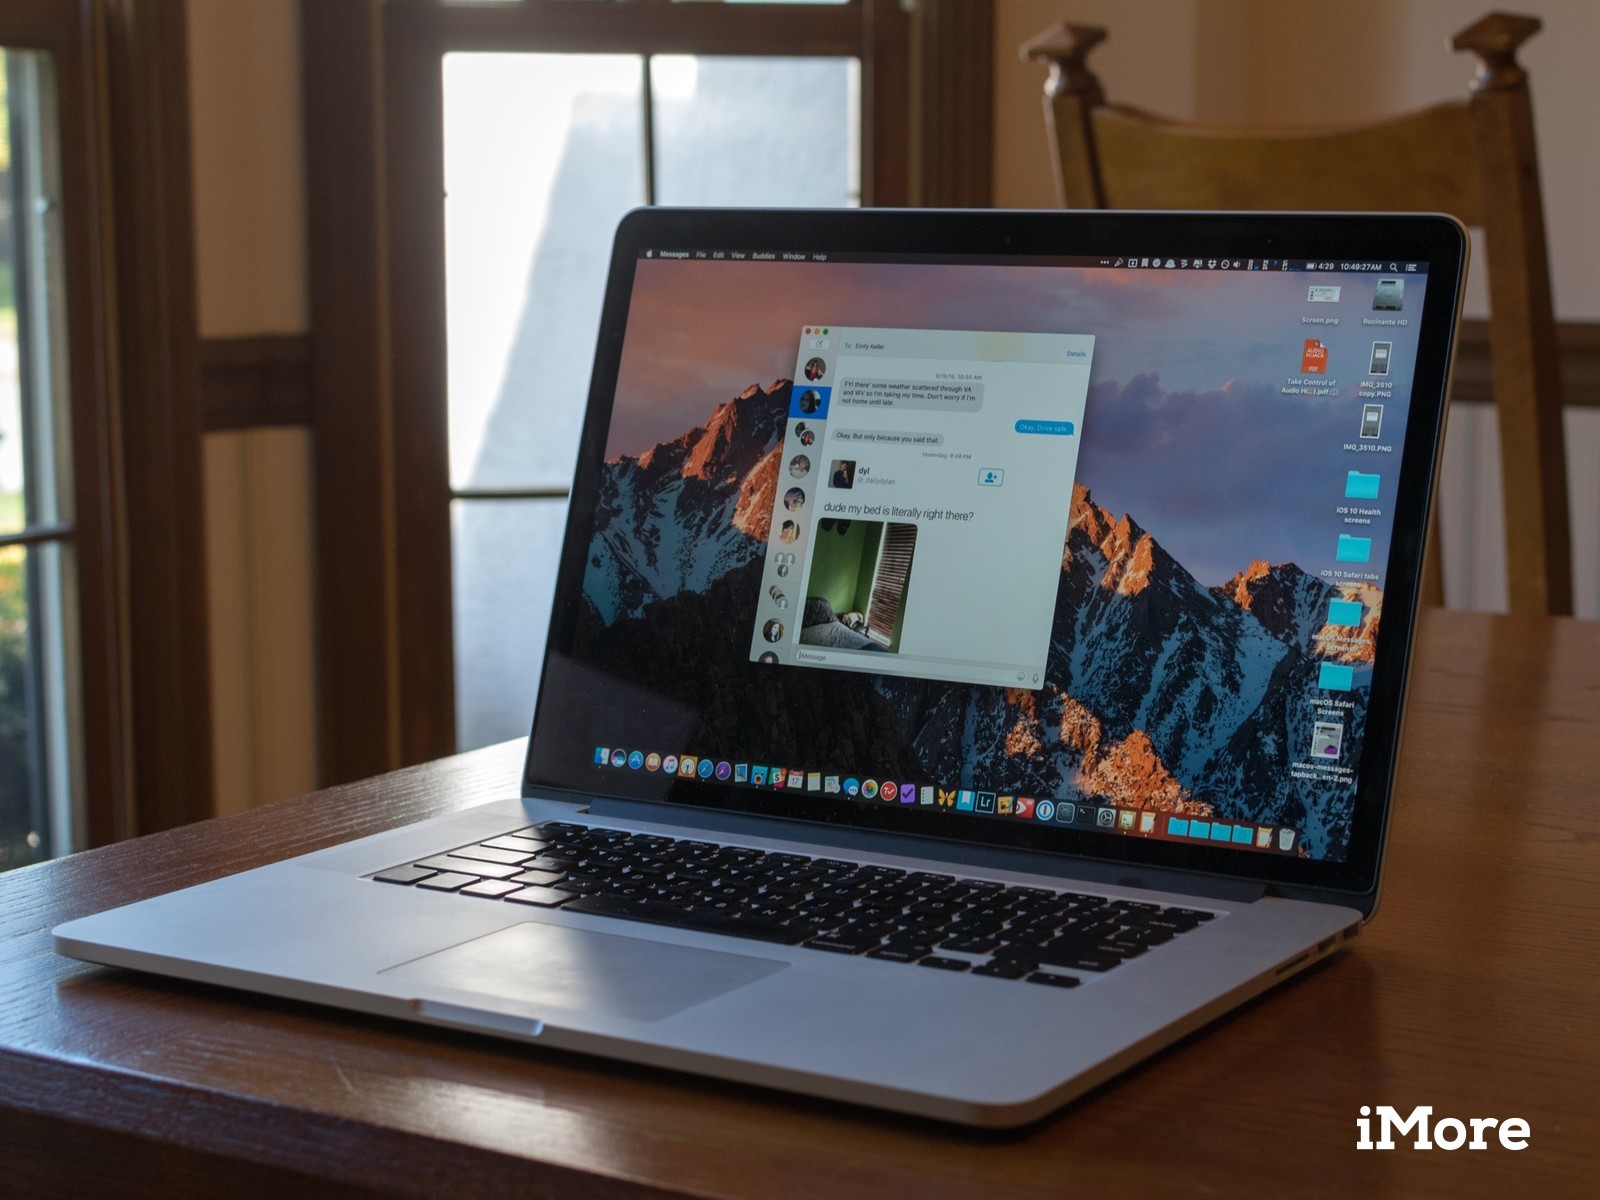 2019 download all photos from icloud to macbook pro 2019 windows 10